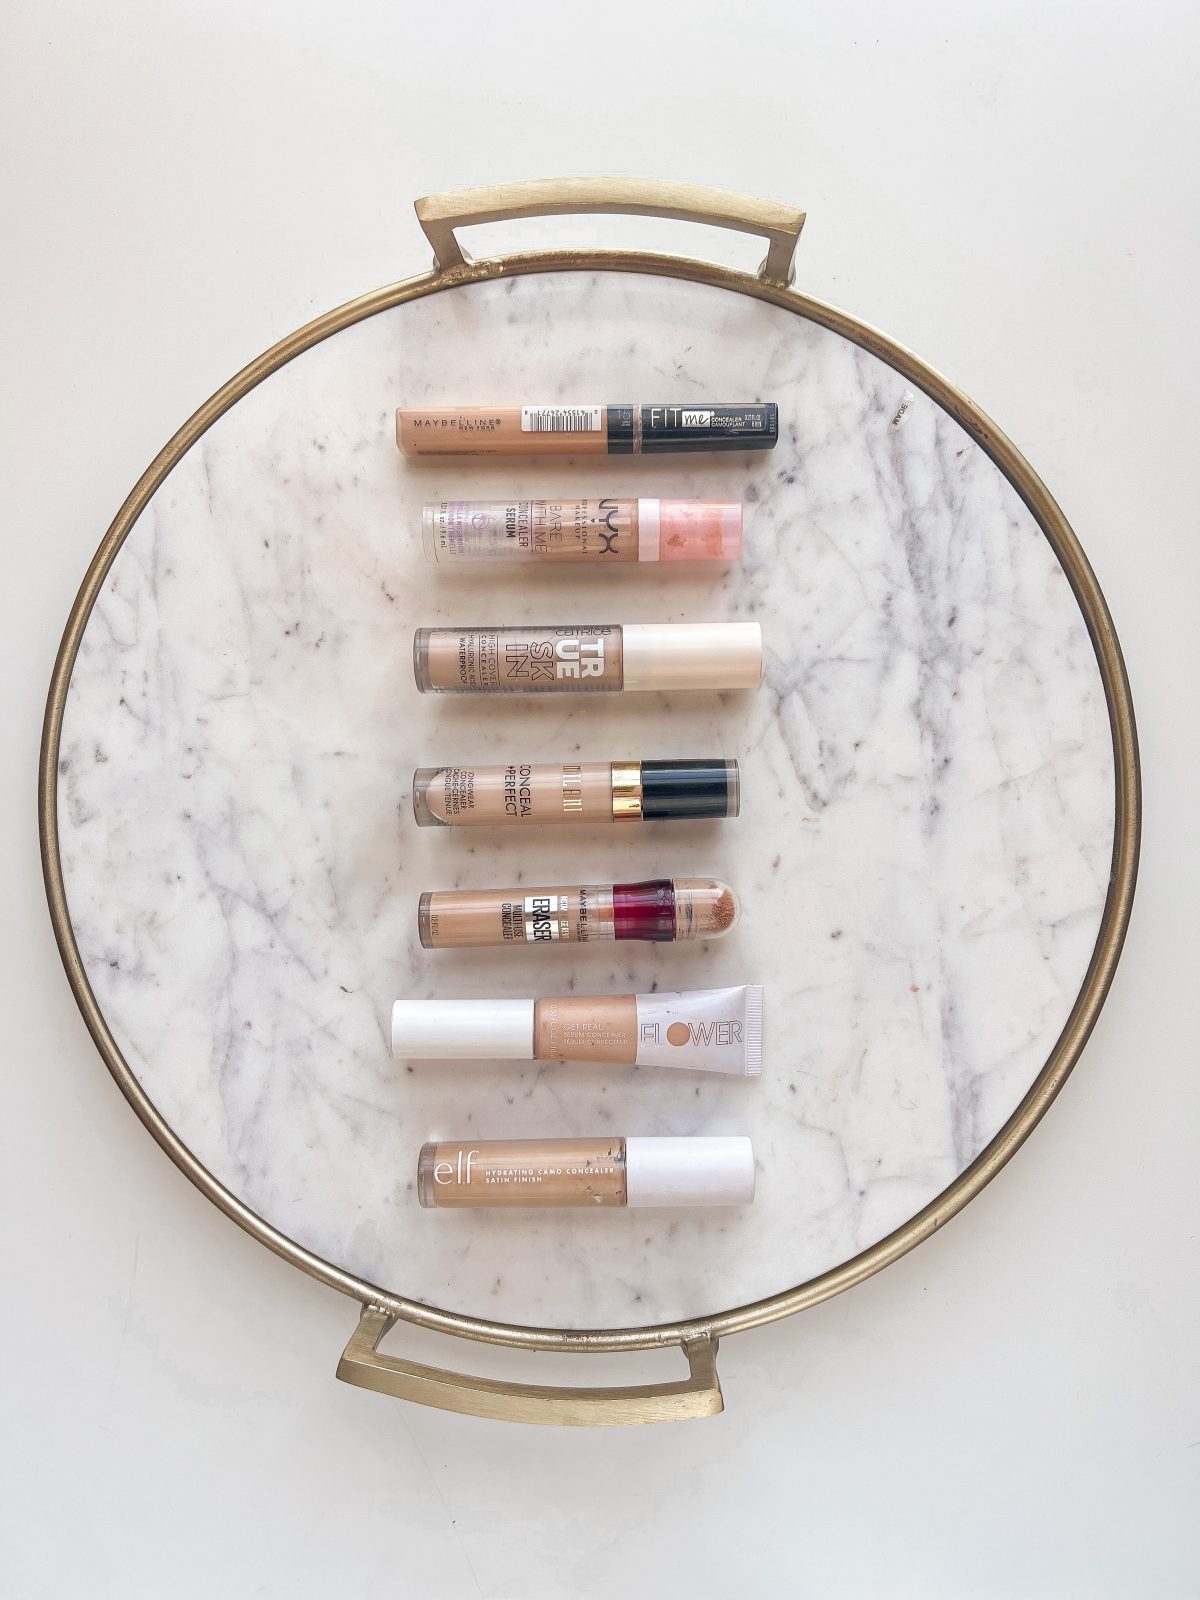 Discover the 7 best drugstore concealers. There's something for everyone in this collection!